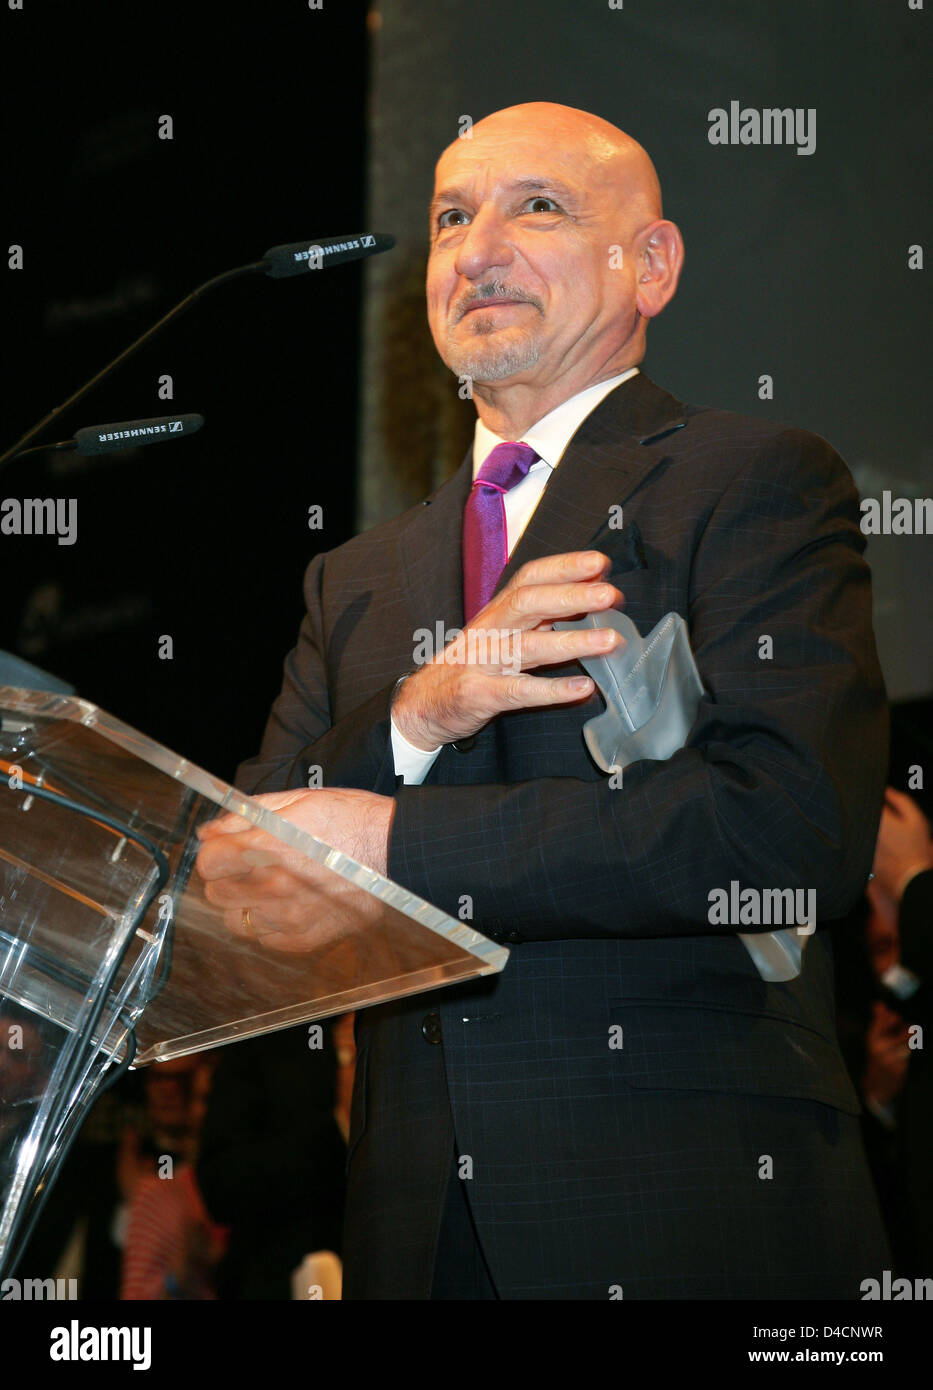 Brirtish actor Ben Kingsley receives the lifetime award at the charity gala 'Cinema for Peace' in Berlin, Germany, 11 February 2008. The annual charity event takes place in the course of the 58th Berlinale. Photo: Jens Kalaene Stock Photo